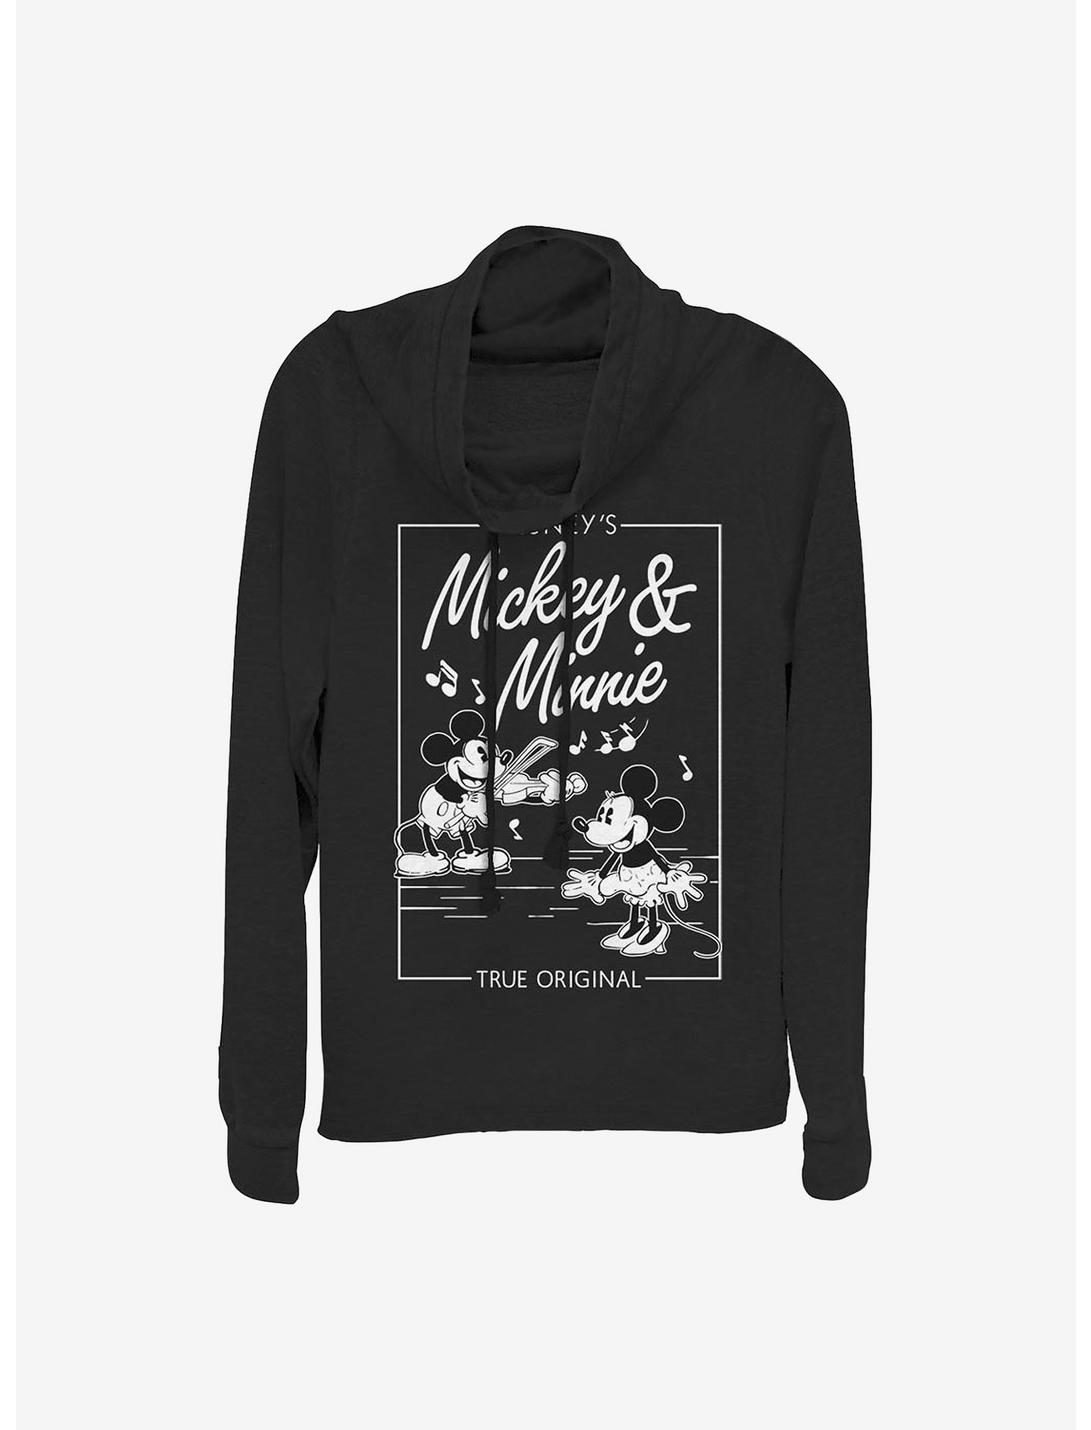 Disney Mickey Mouse & Minnie Mouse Music Cover Cowlneck Long-Sleeve Girls Top, BLACK, hi-res